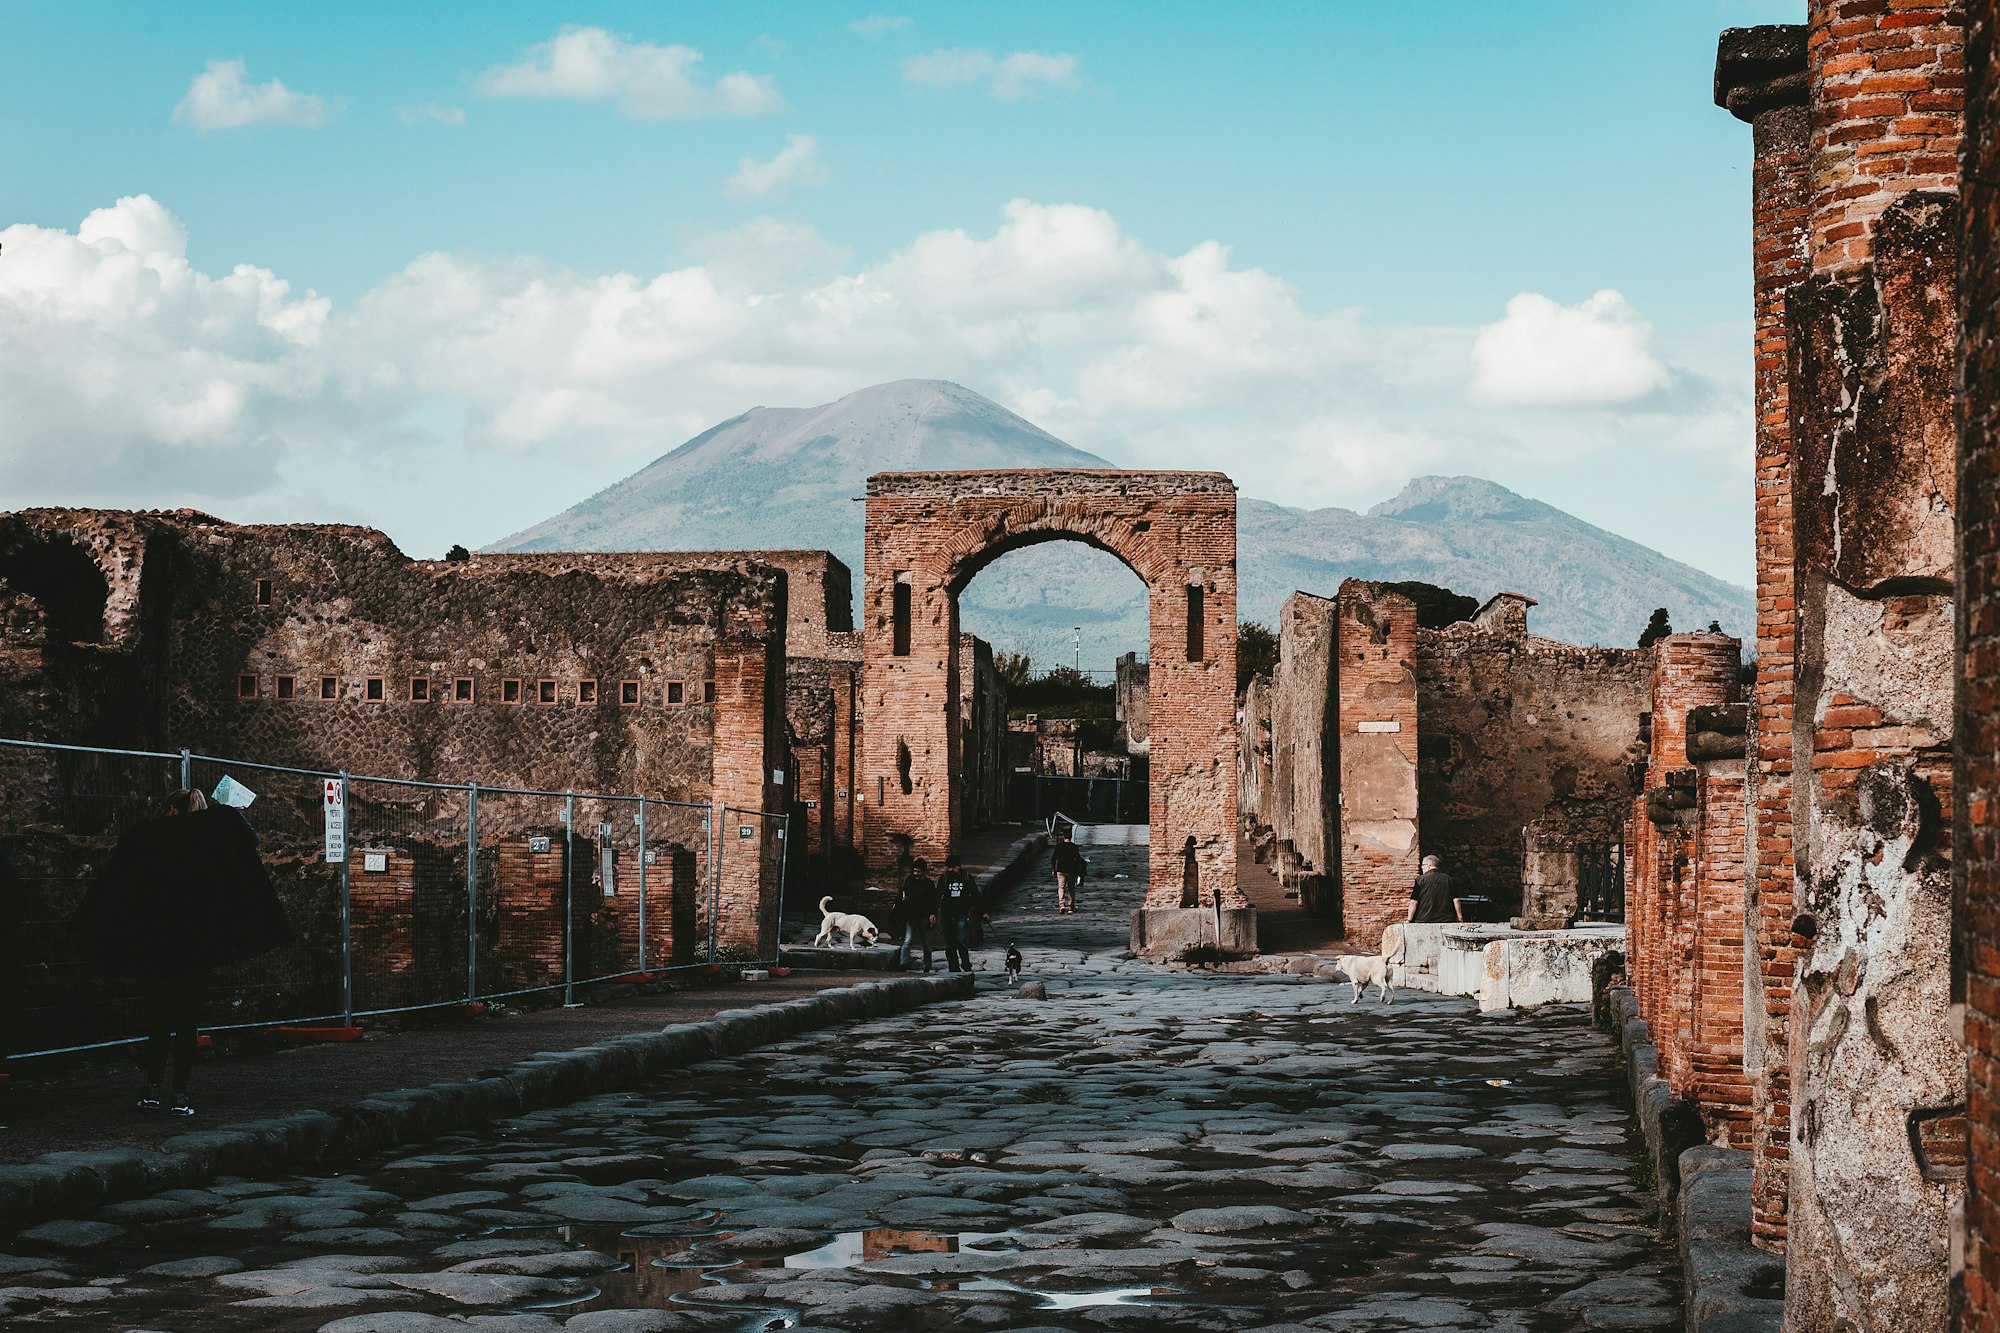 Back in November 2016, my Fiancée and I headed to the Pompeii Excavation Site. I had been here when I was 15, back in 2005, but they’ve opened up SO MUCH more of the site since - I wasn’t prepared for the huge walk around the site haha, very warm day too. I’ve used one of Annie Spratt’s presets to give this photo a bit of extra depth, looks pretty good I think!